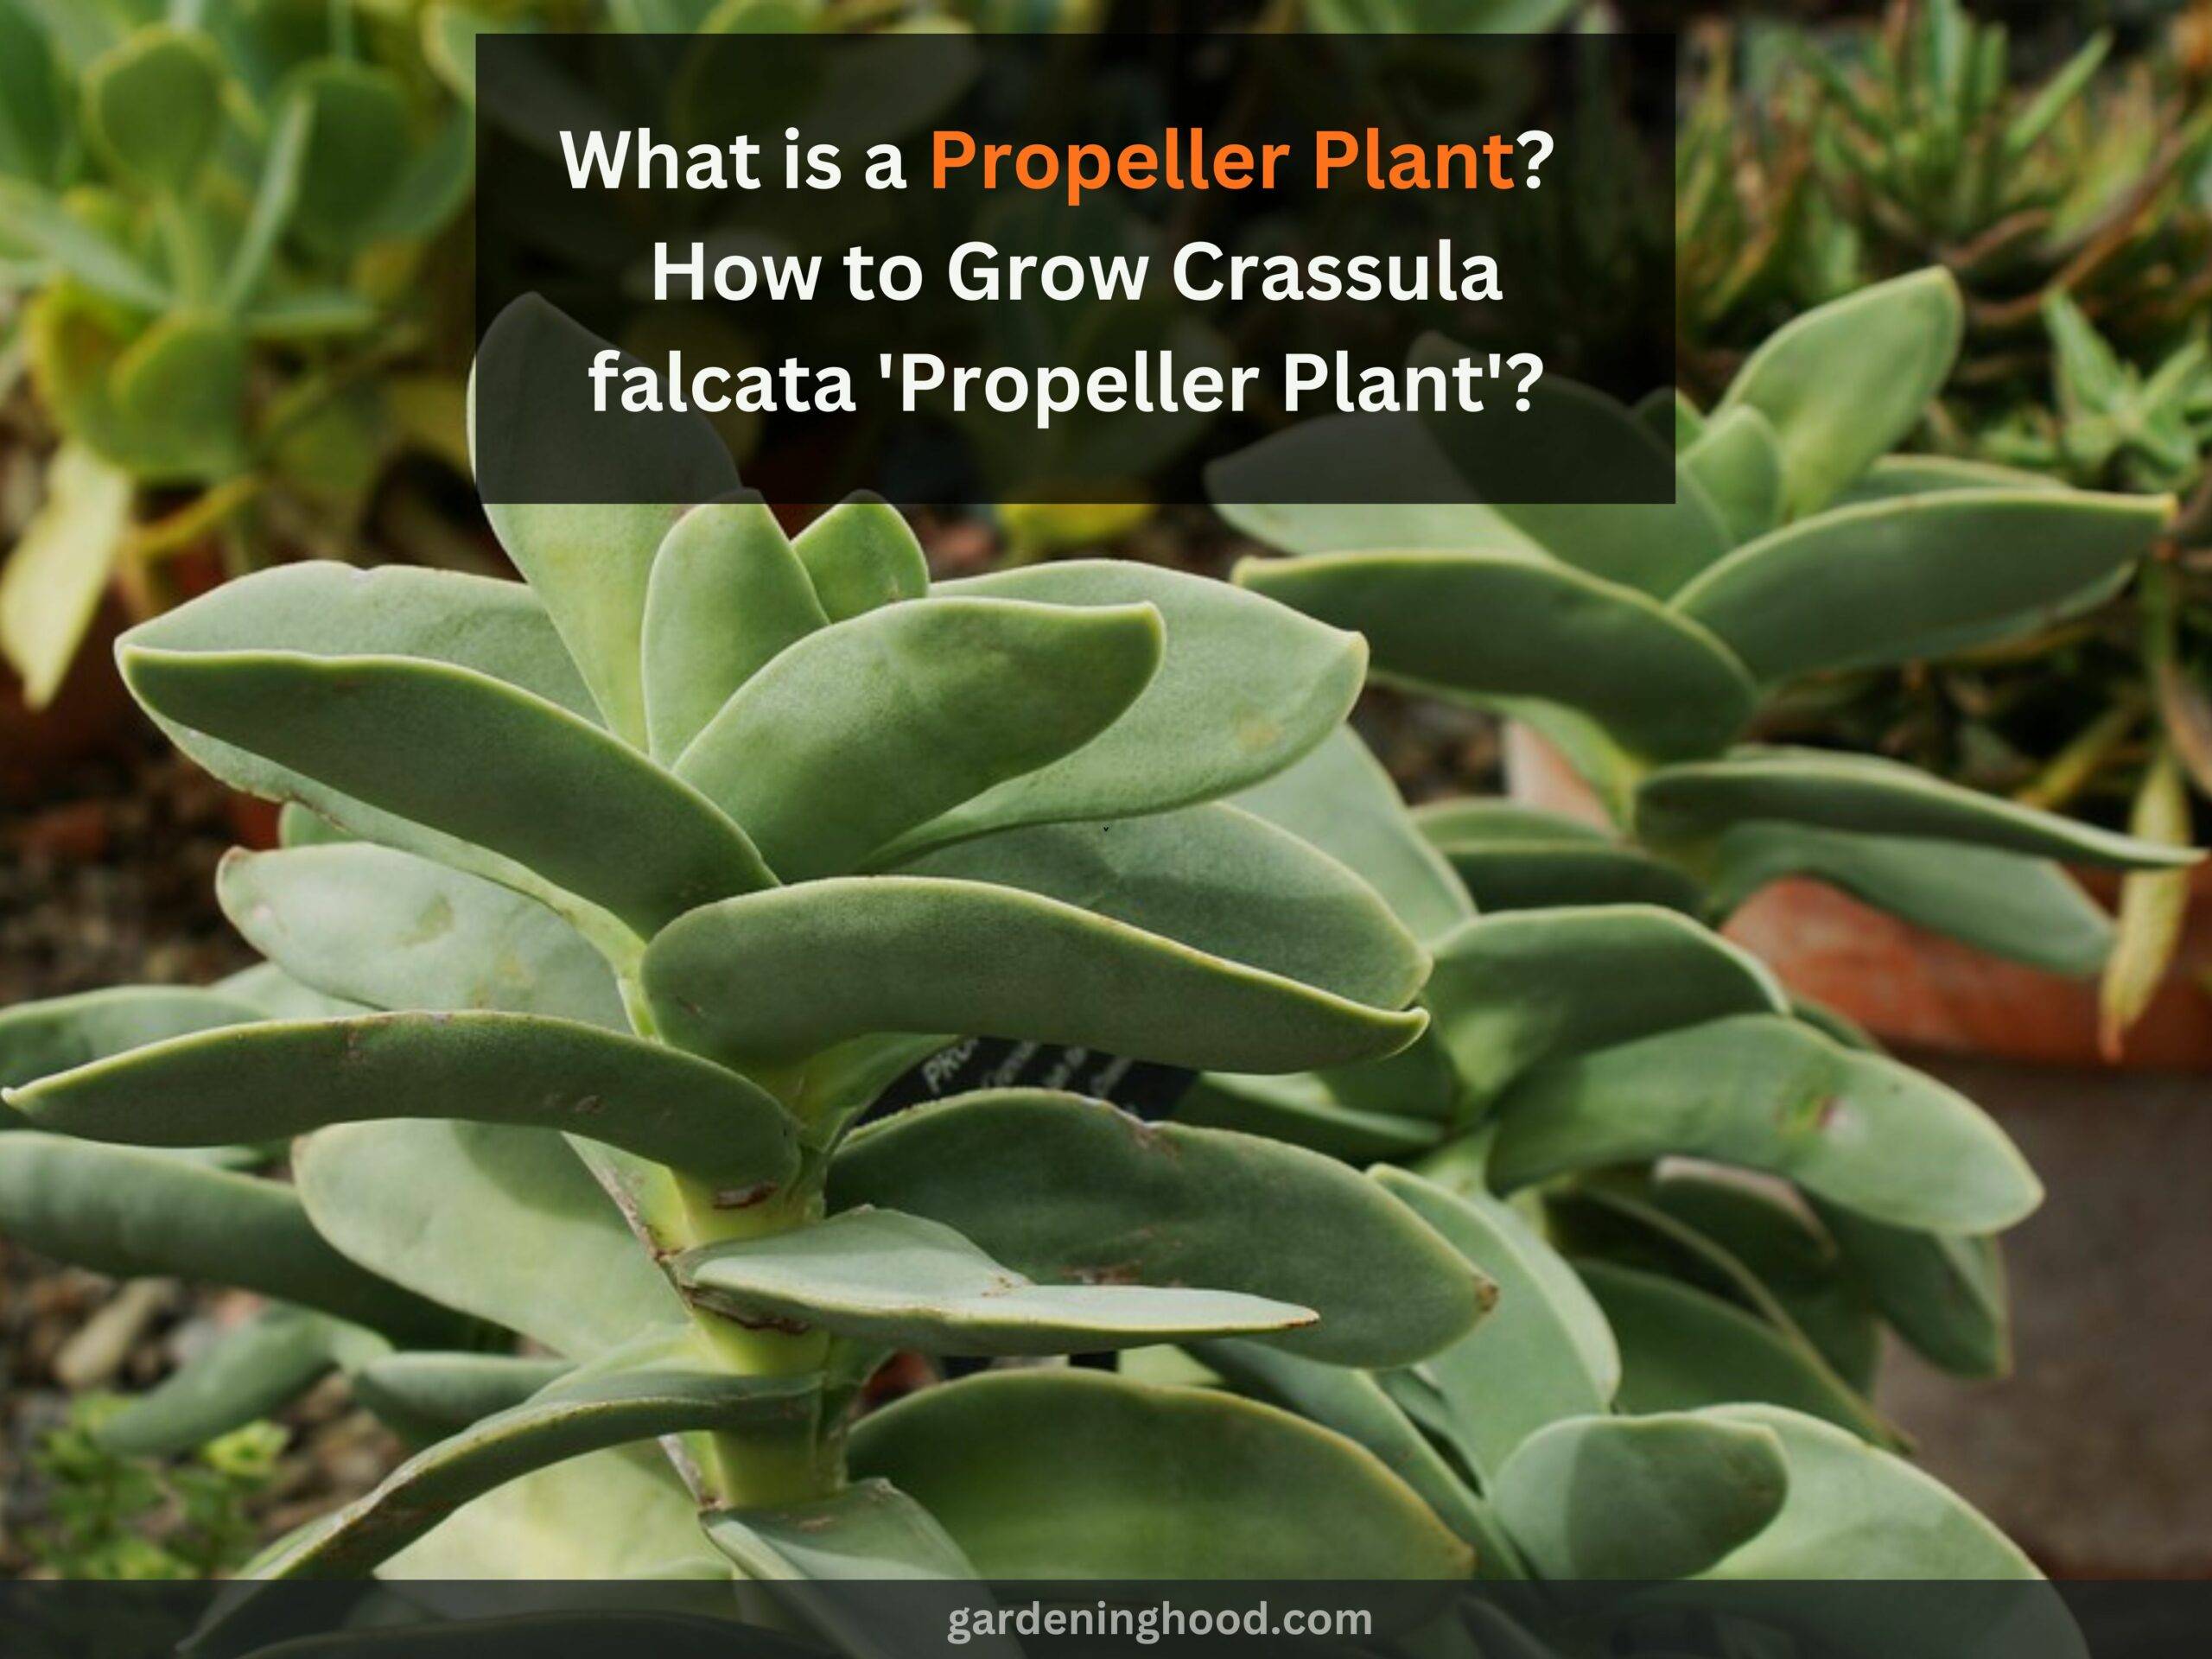 What is a Propeller Plant? - How to Grow Crassula falcata 'Propeller Plant'? 